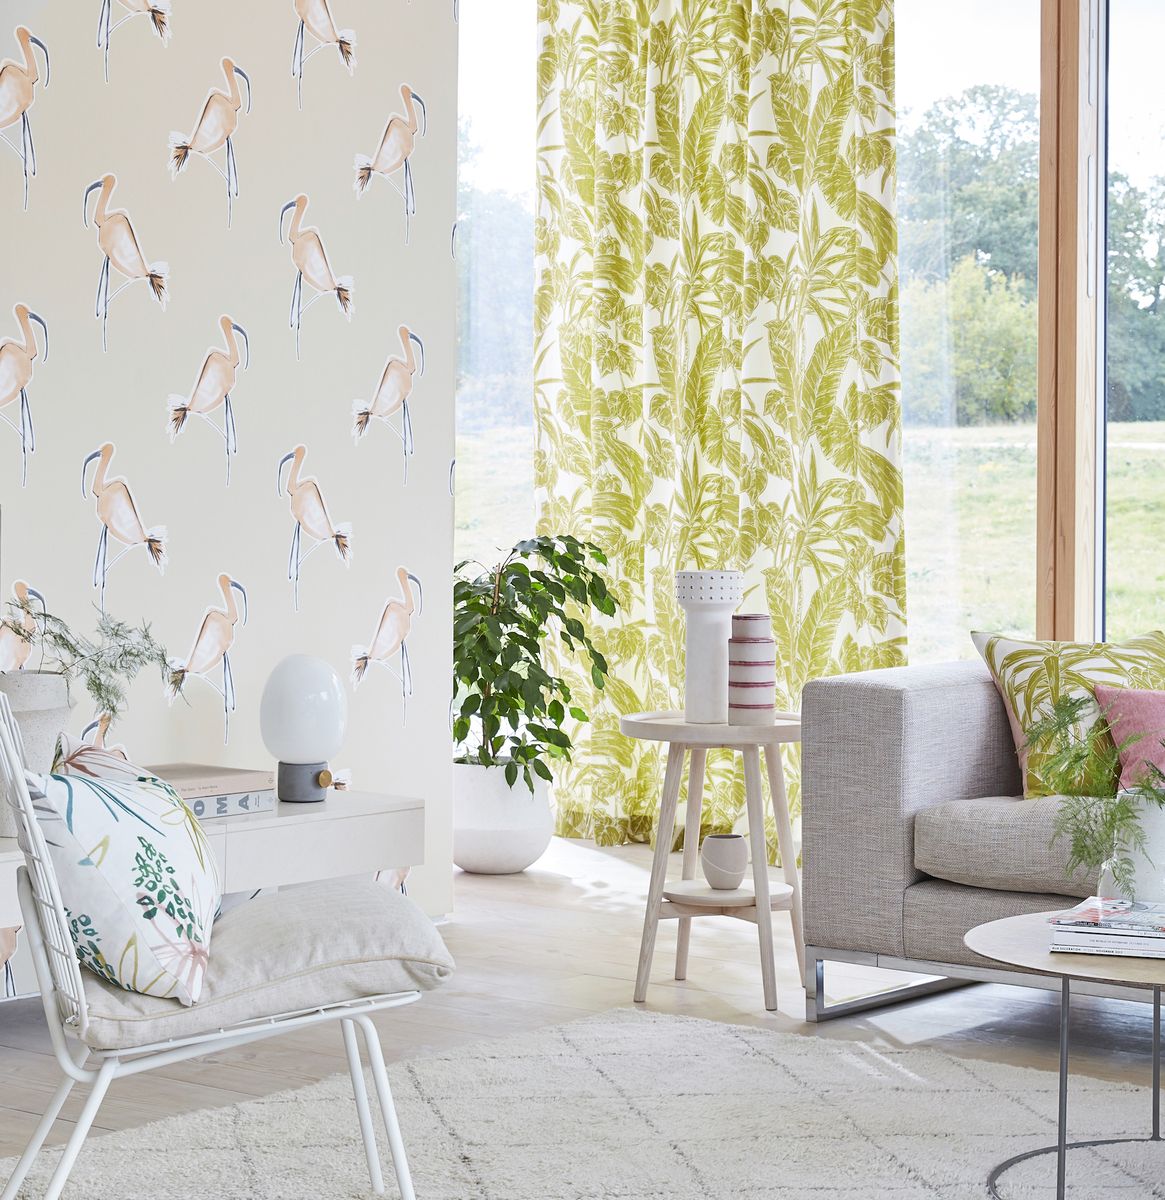 <p>Another clever living room wallpaper idea is to use it as a partition. In a through room, use wallpaper to define the spaces. This fun but sophisticated flamingo design gives the room a Miami feel, further complemented by the retro-style palm leaf fabric on the <a href="https://www.housebeautiful.com/uk/decorate/windows/g35224529/best-blackout-curtains/">curtains</a> and the white metal pool chair.</p><p><em>Pictured: Zanzibar wallpaper; Parlour Palm Citrus Fabric, both <a href="https://scion.sandersondesigngroup.com/">Scion</a></em></p>